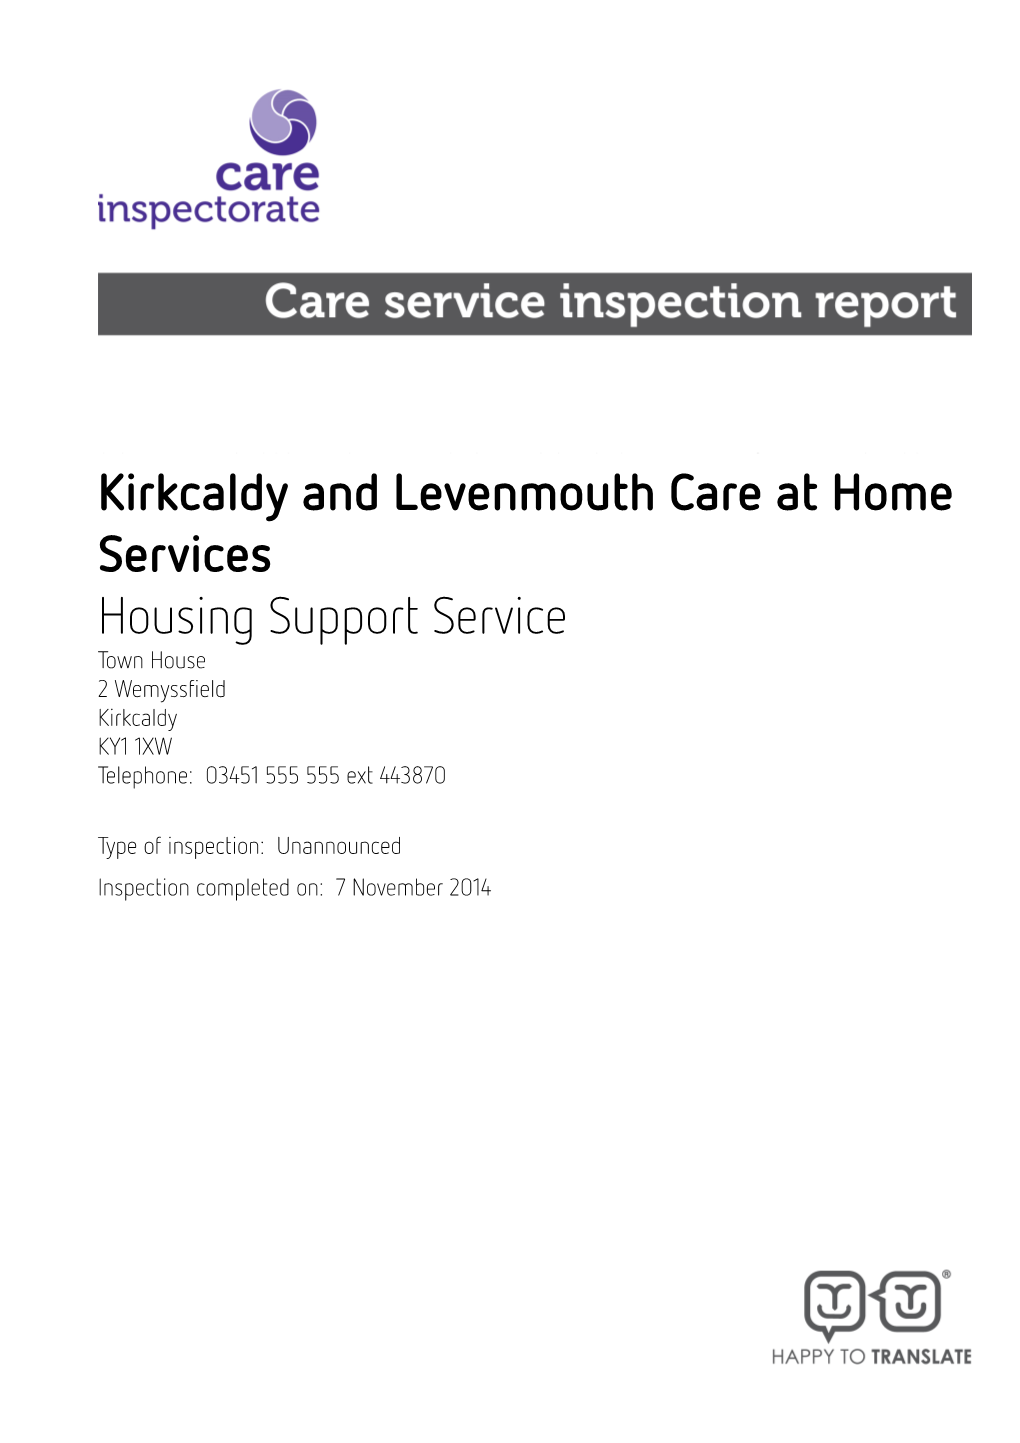 Kirkcaldy and Levenmouth Care at Home Services Housing Support Service Town House 2 Wemyssfield Kirkcaldy KY1 1XW Telephone: 03451 555 555 Ext 443870